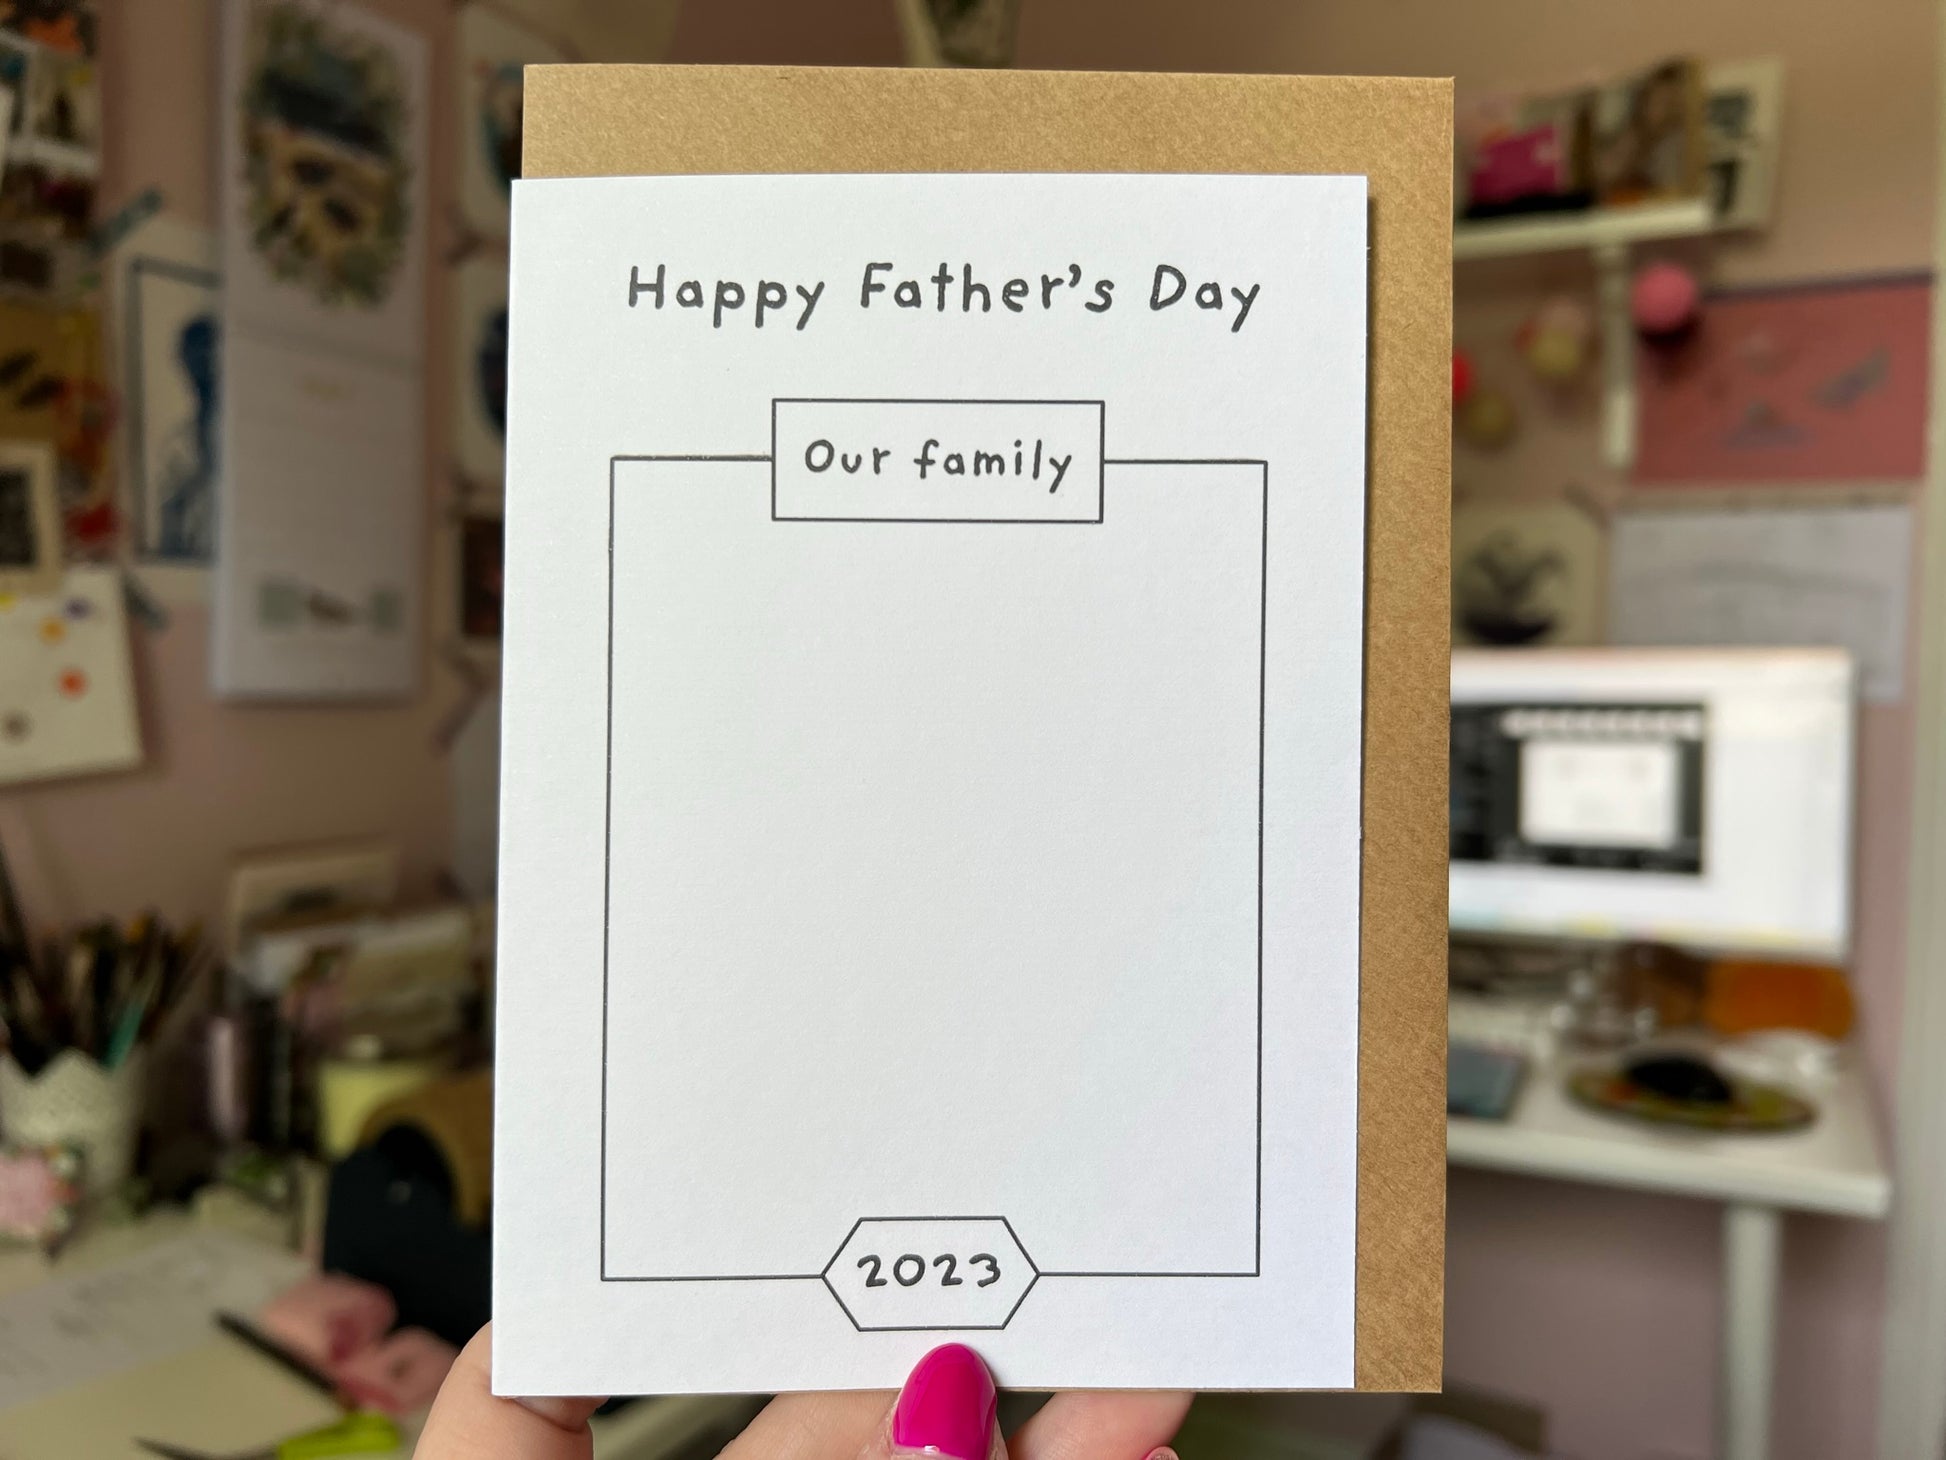 An A6 card saying 'Happy Father's Day' on the front and a big square on it for a child to draw a picture of the family